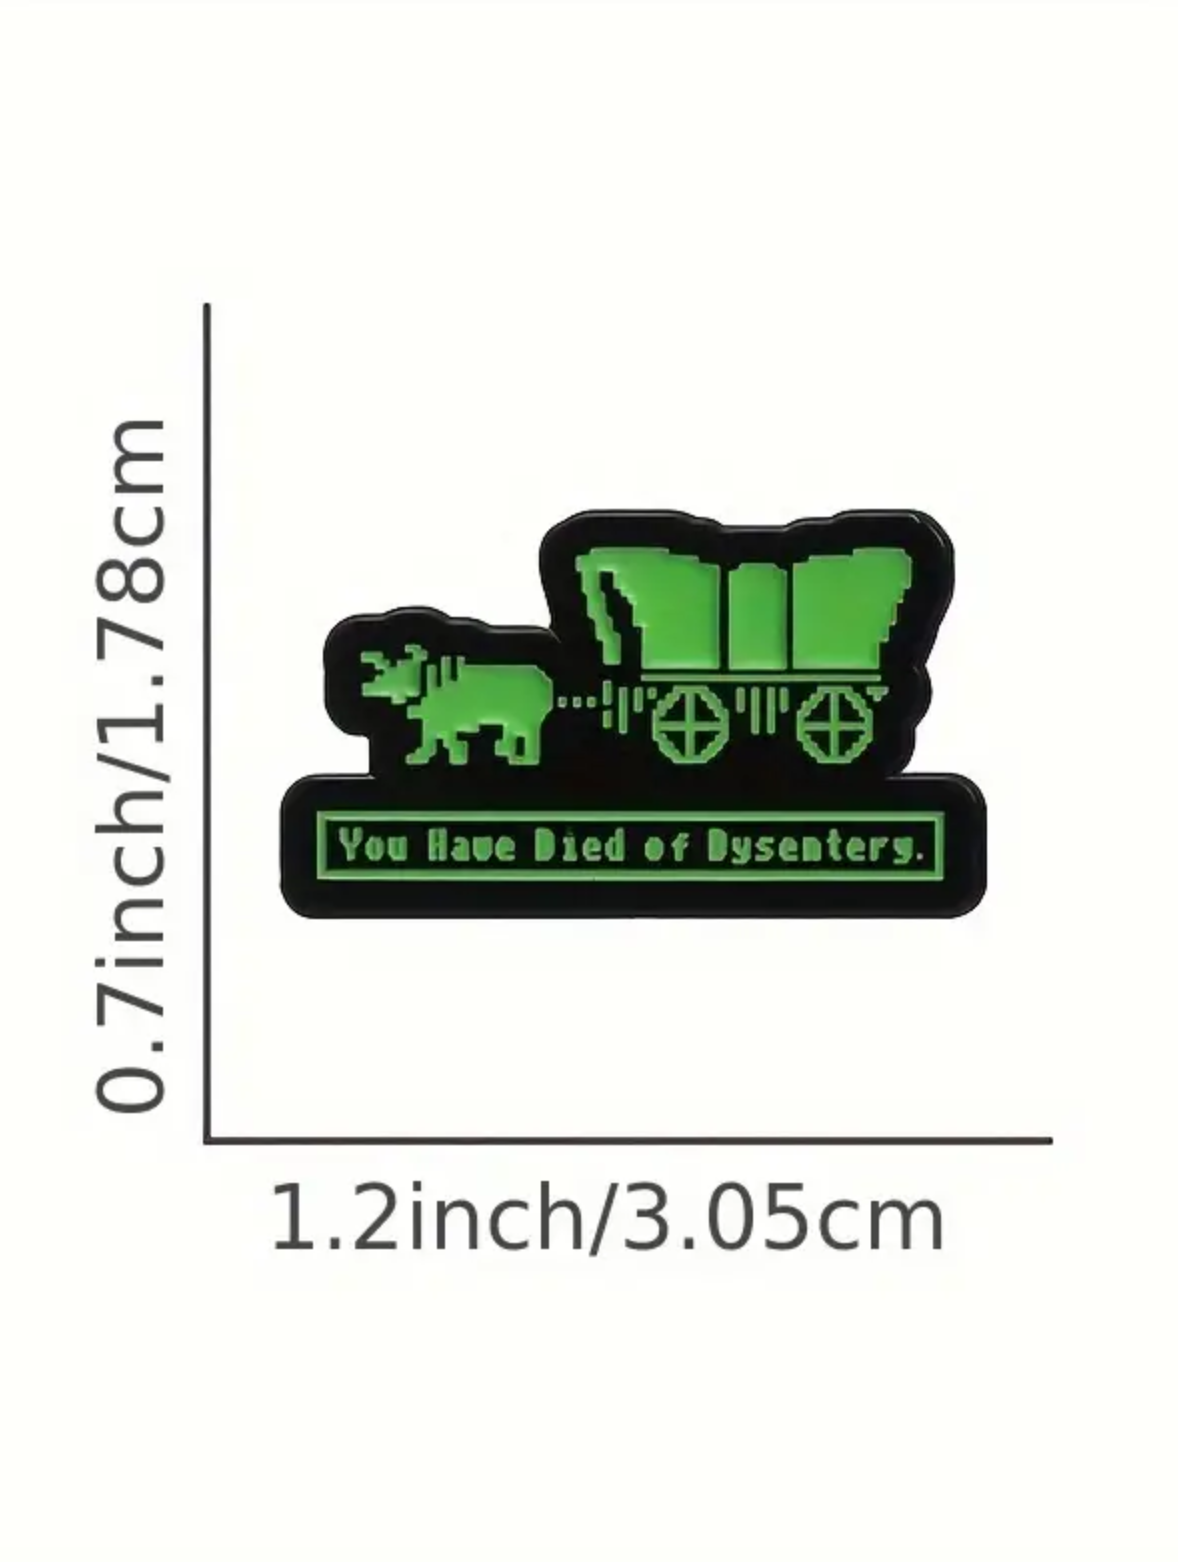 Died of Dysentery Enamel Pin